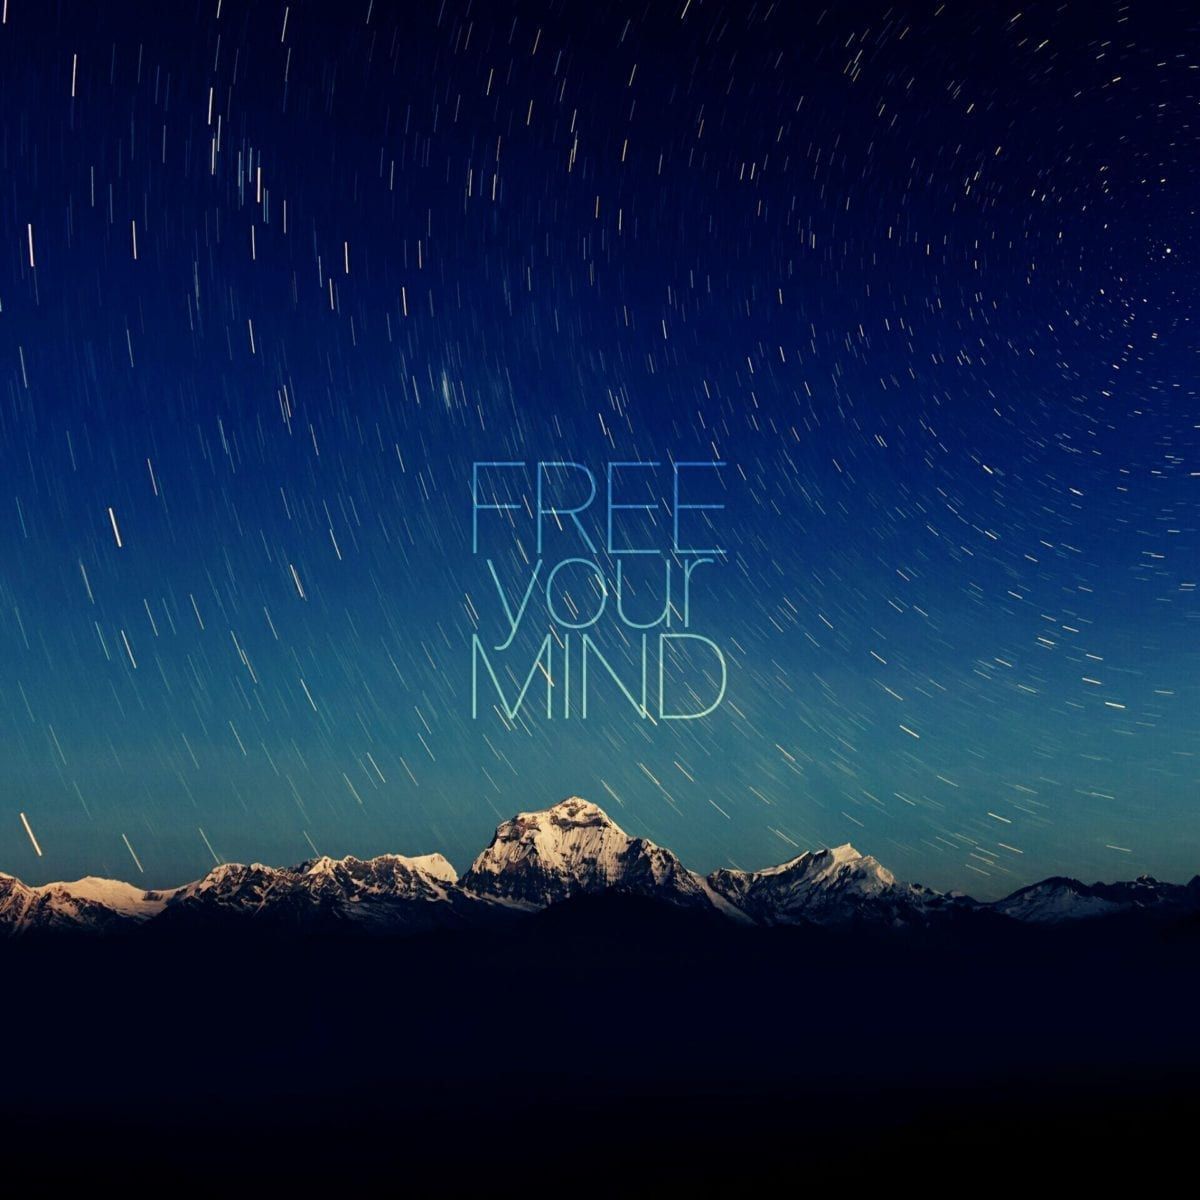 Image of a mountain with sky and the words "free your mind"